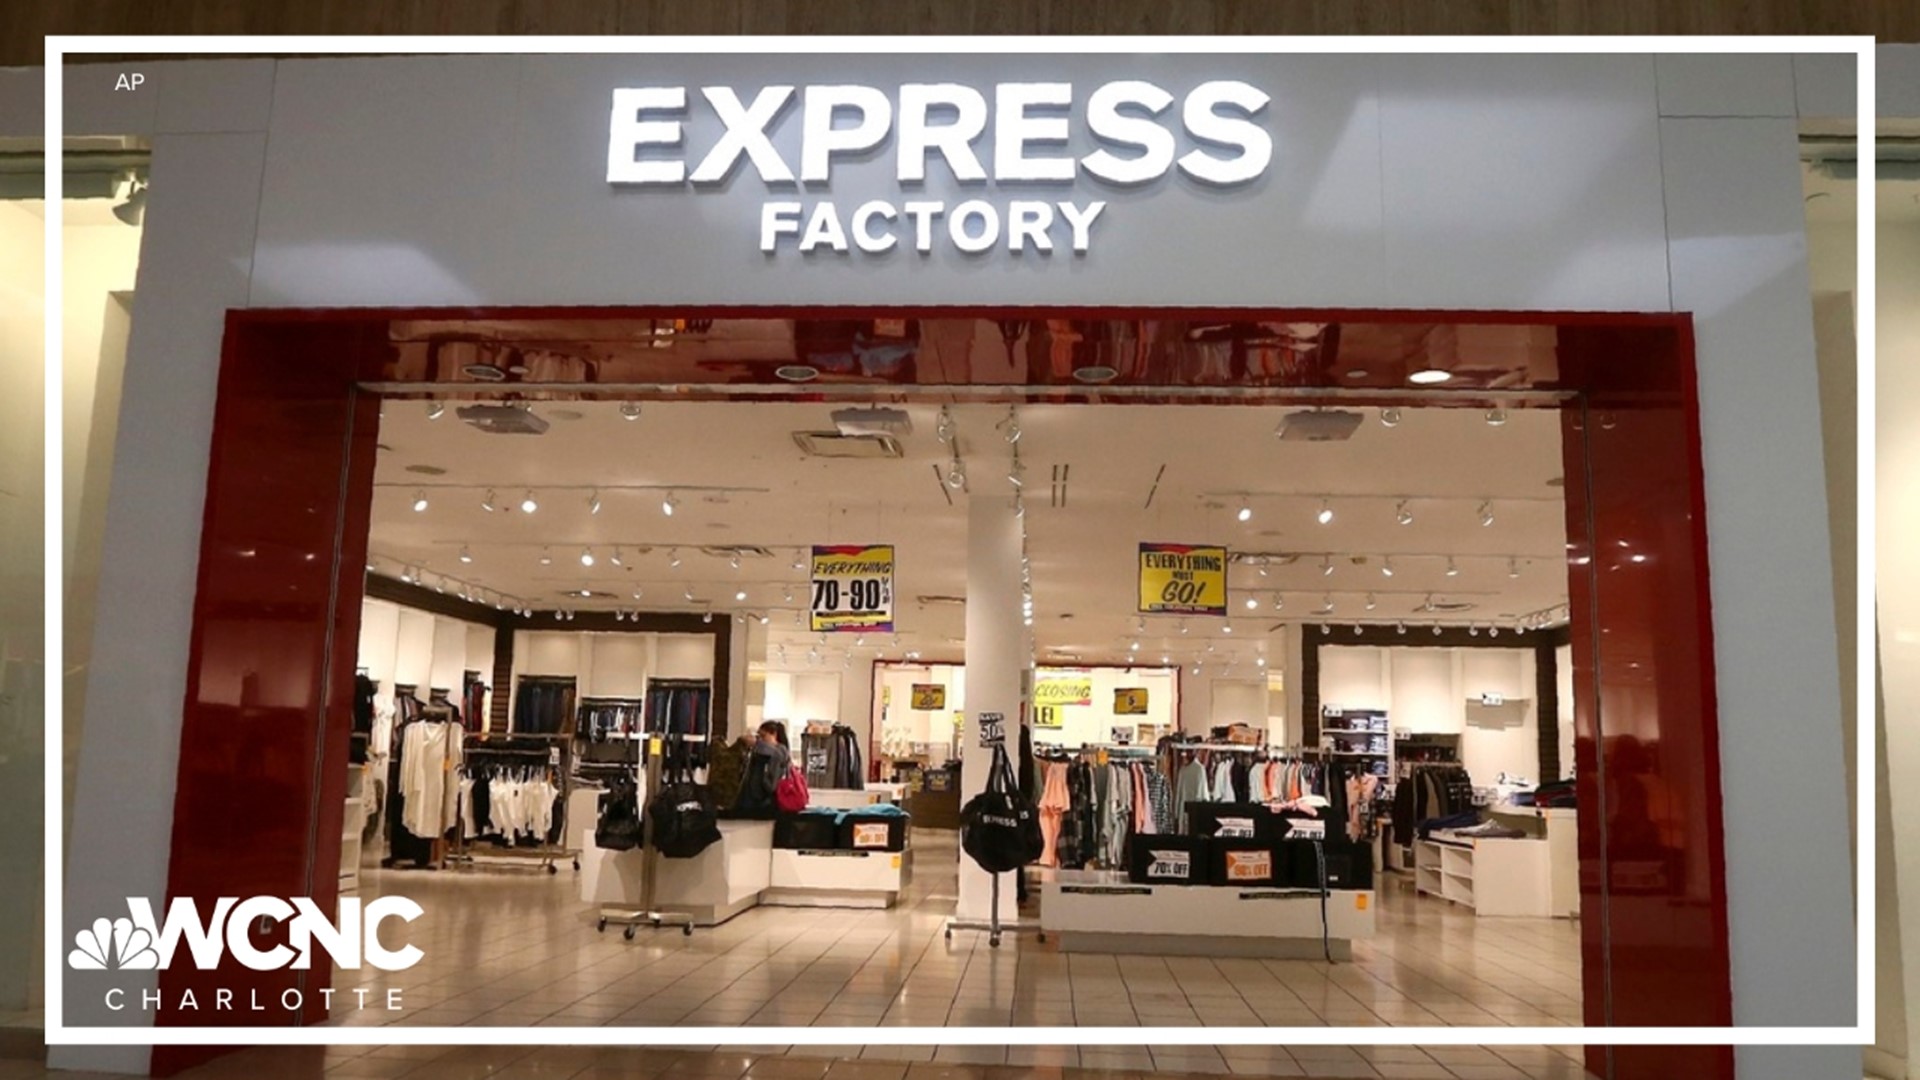 Closing sales are set to begin Tuesday at the nearly 100 Express stores that will be shuttering.